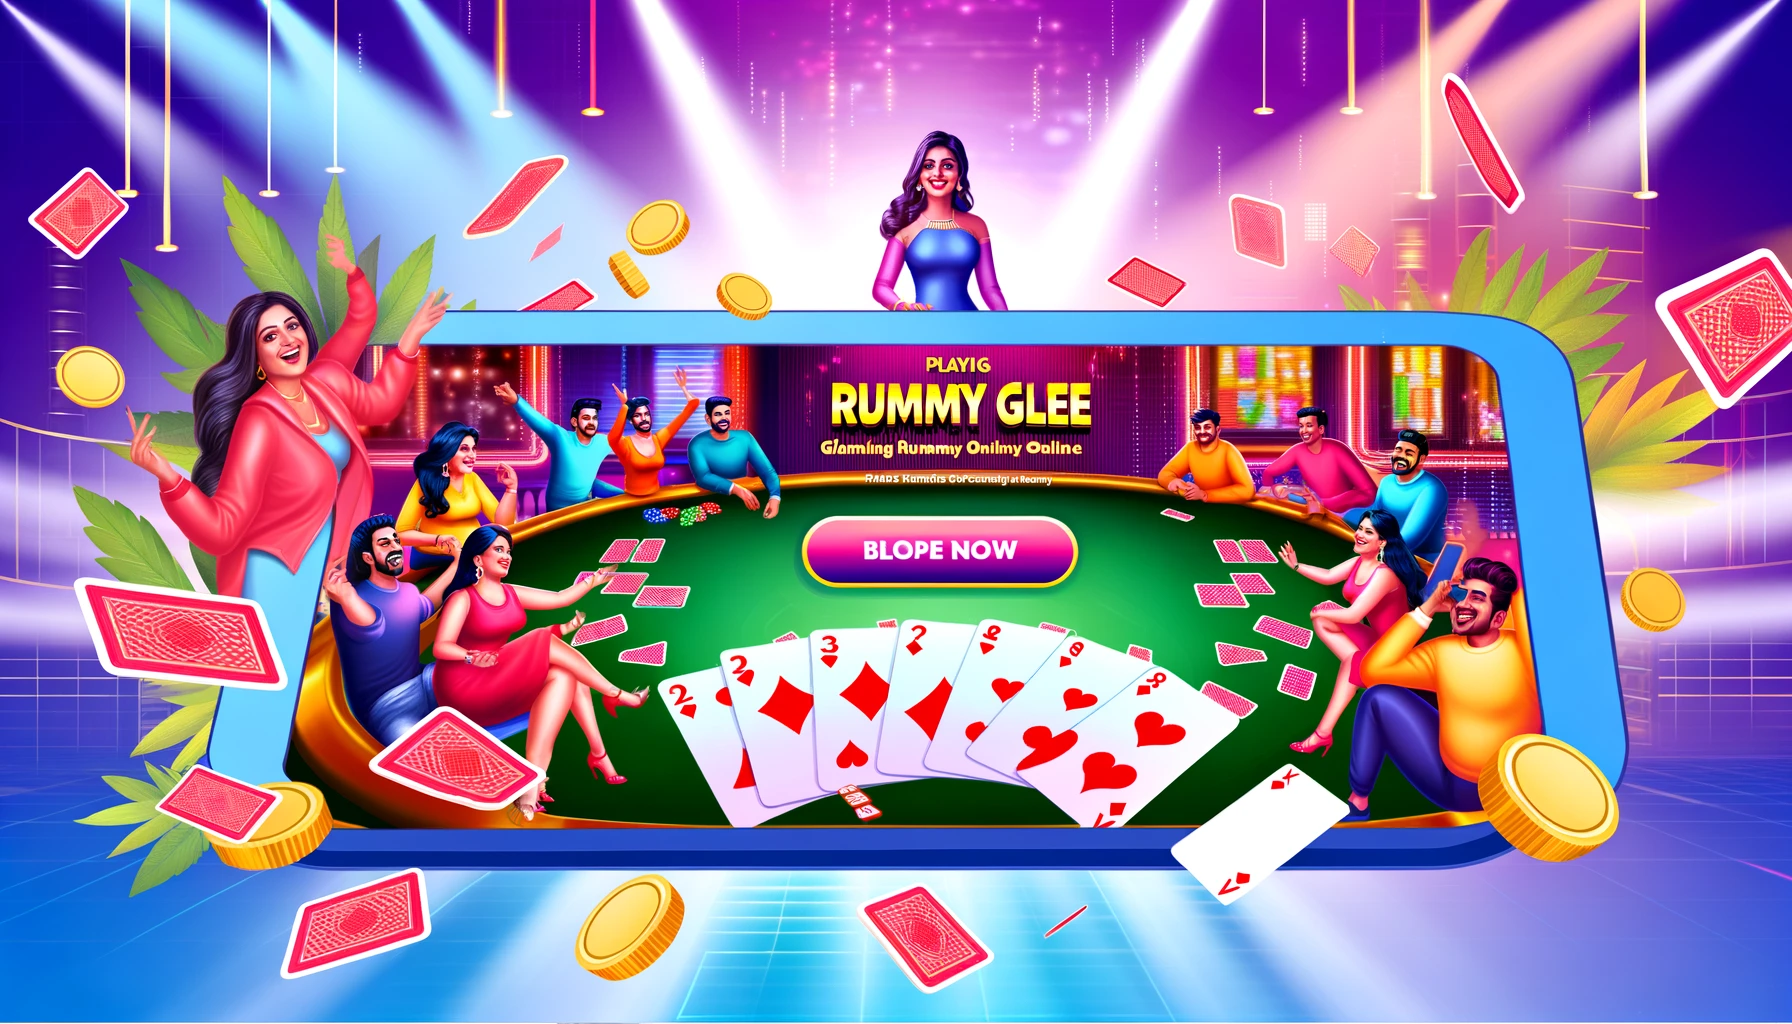 DALL·E 2024-02-21 14.10.27 - Create a vibrant and engaging promotional image for 'Rummy Glee', with the dimensions of 512x288 pixels. The image should highlight the fun and excite